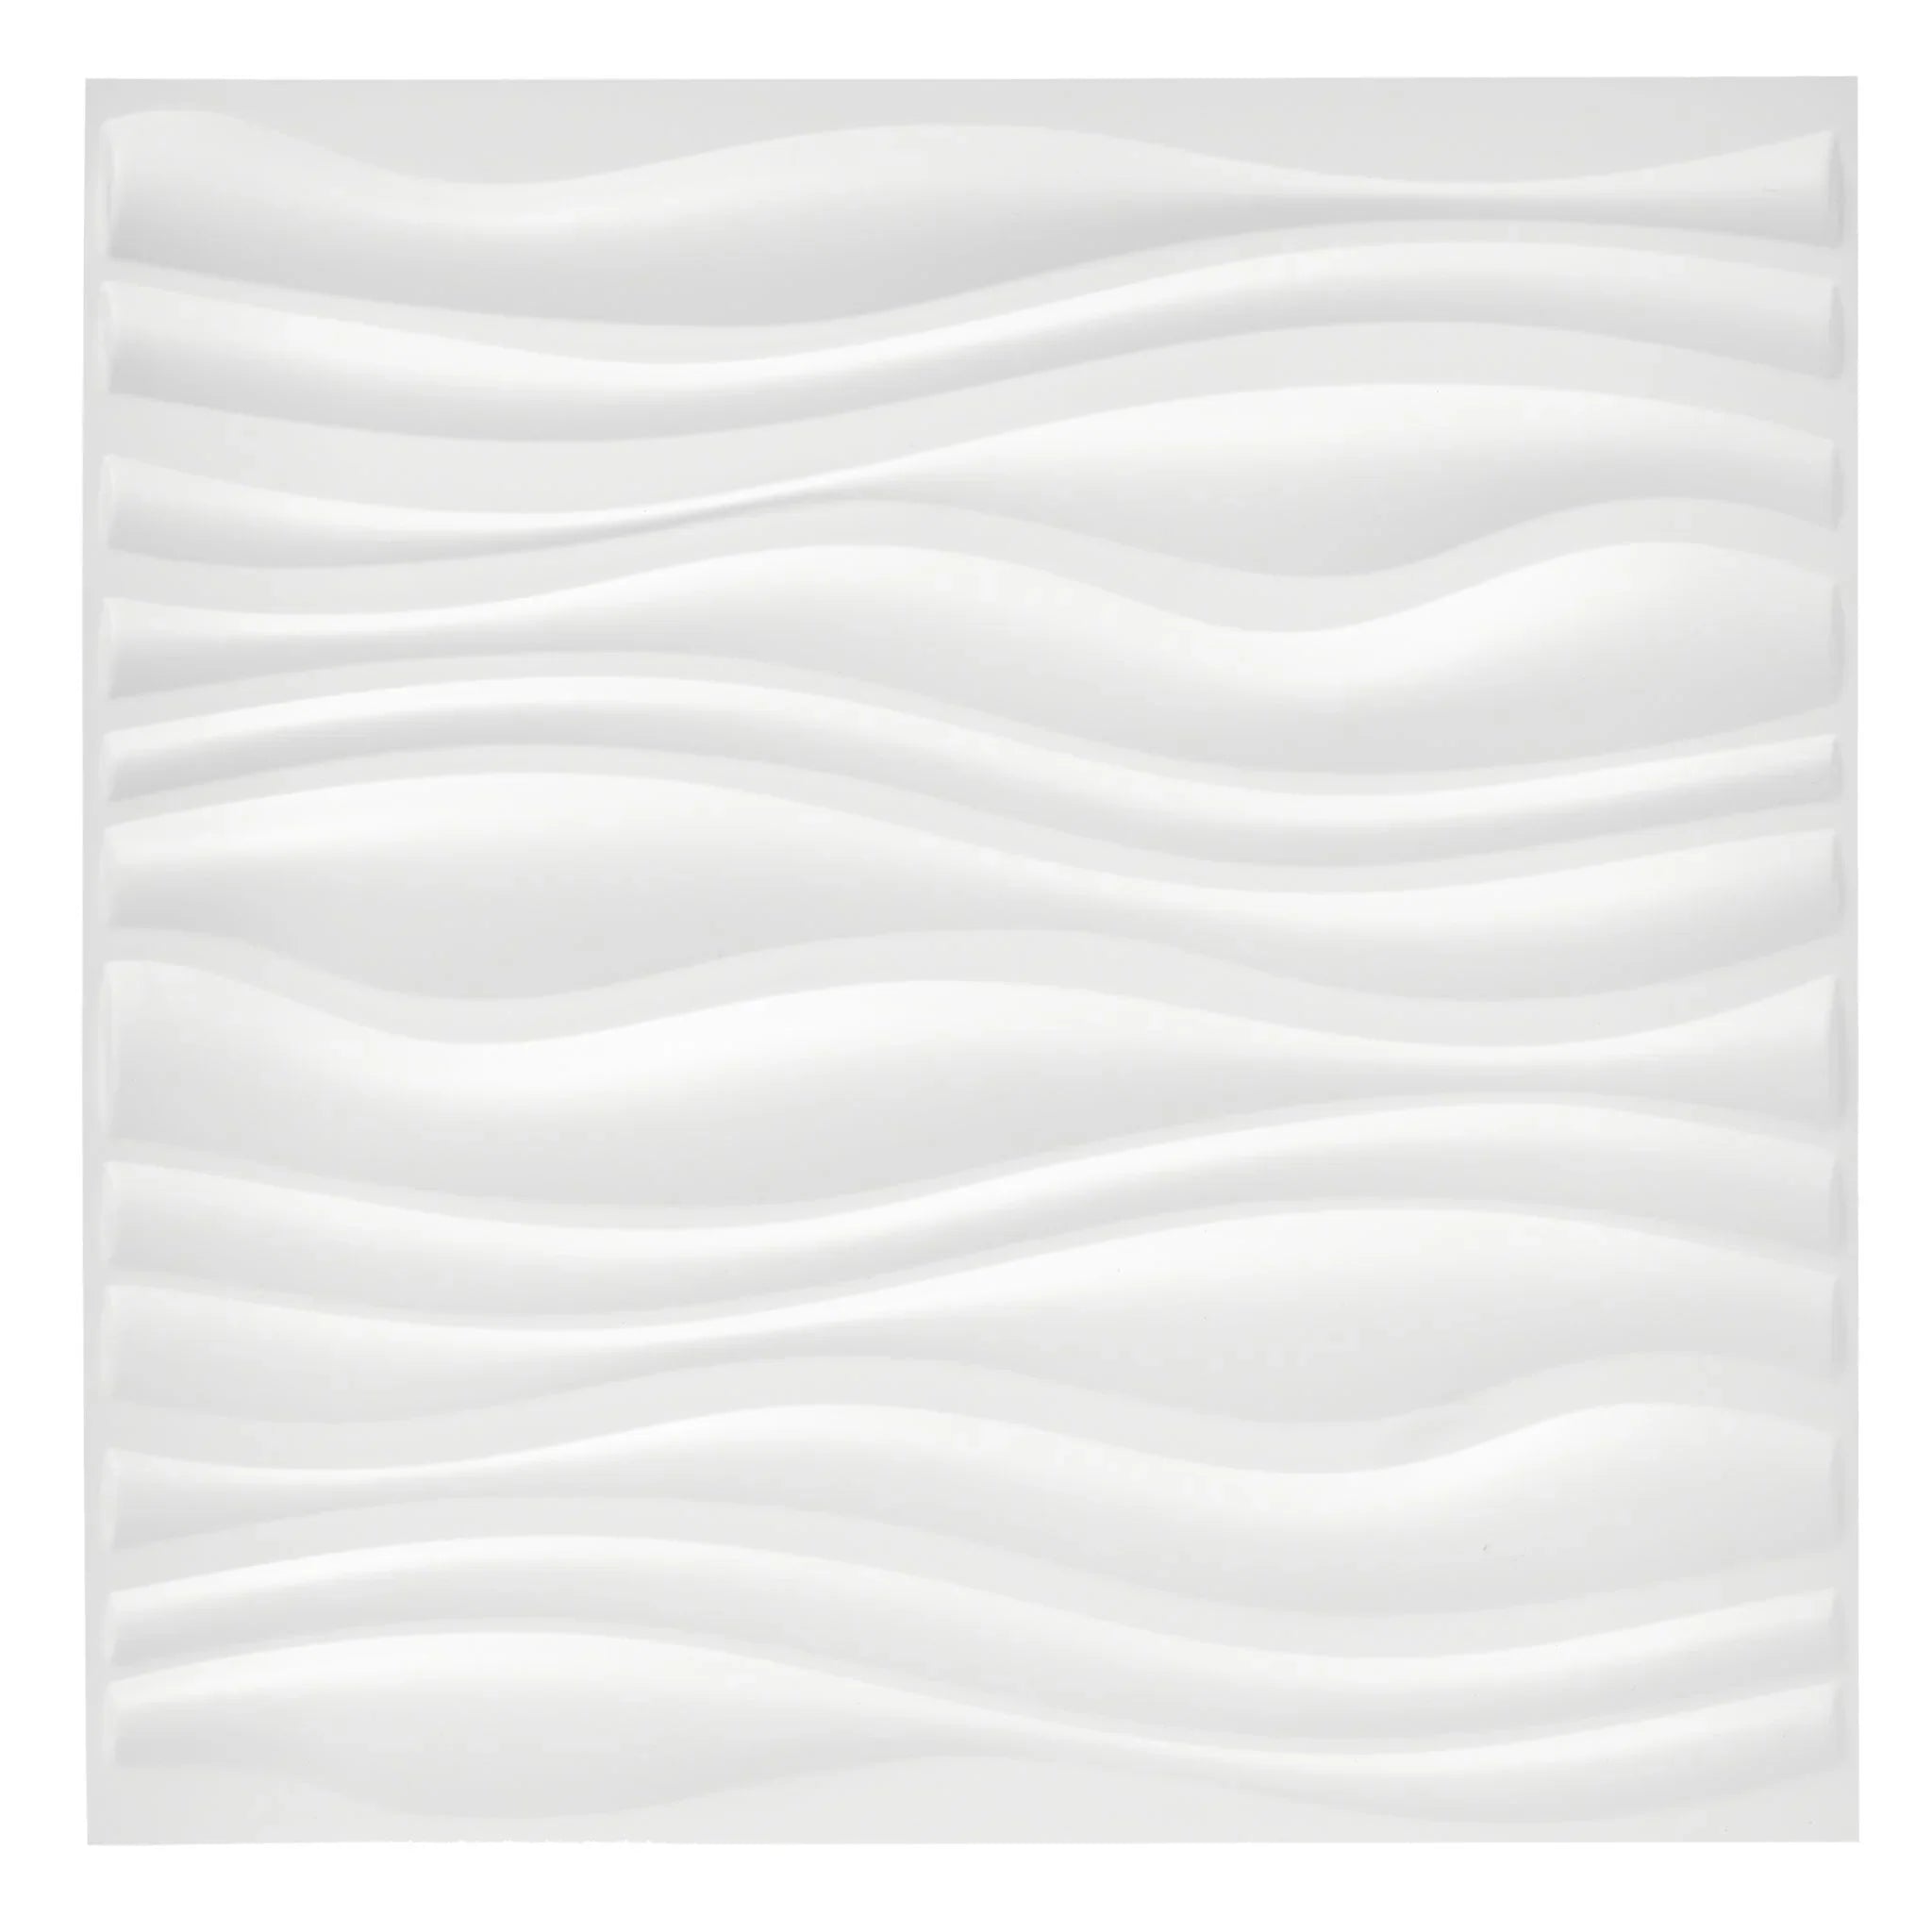 White PVC wall panel with wavy patterns, close-up view